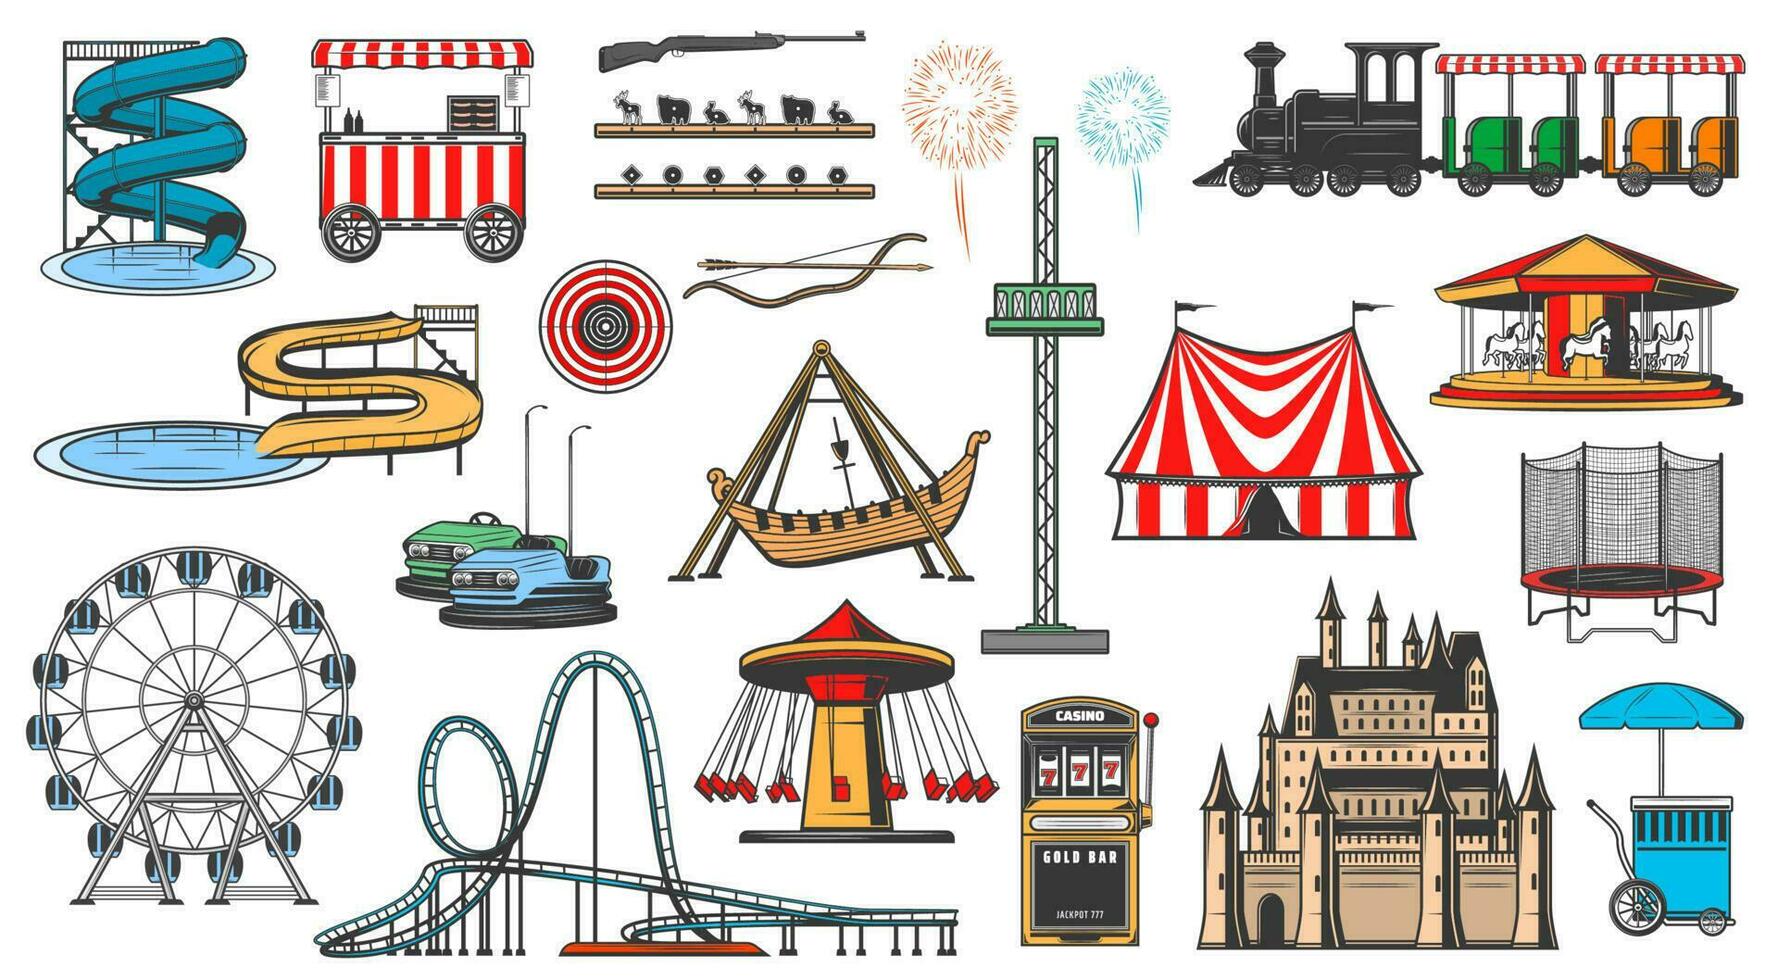 Amusement park and funfair carnival attractions vector